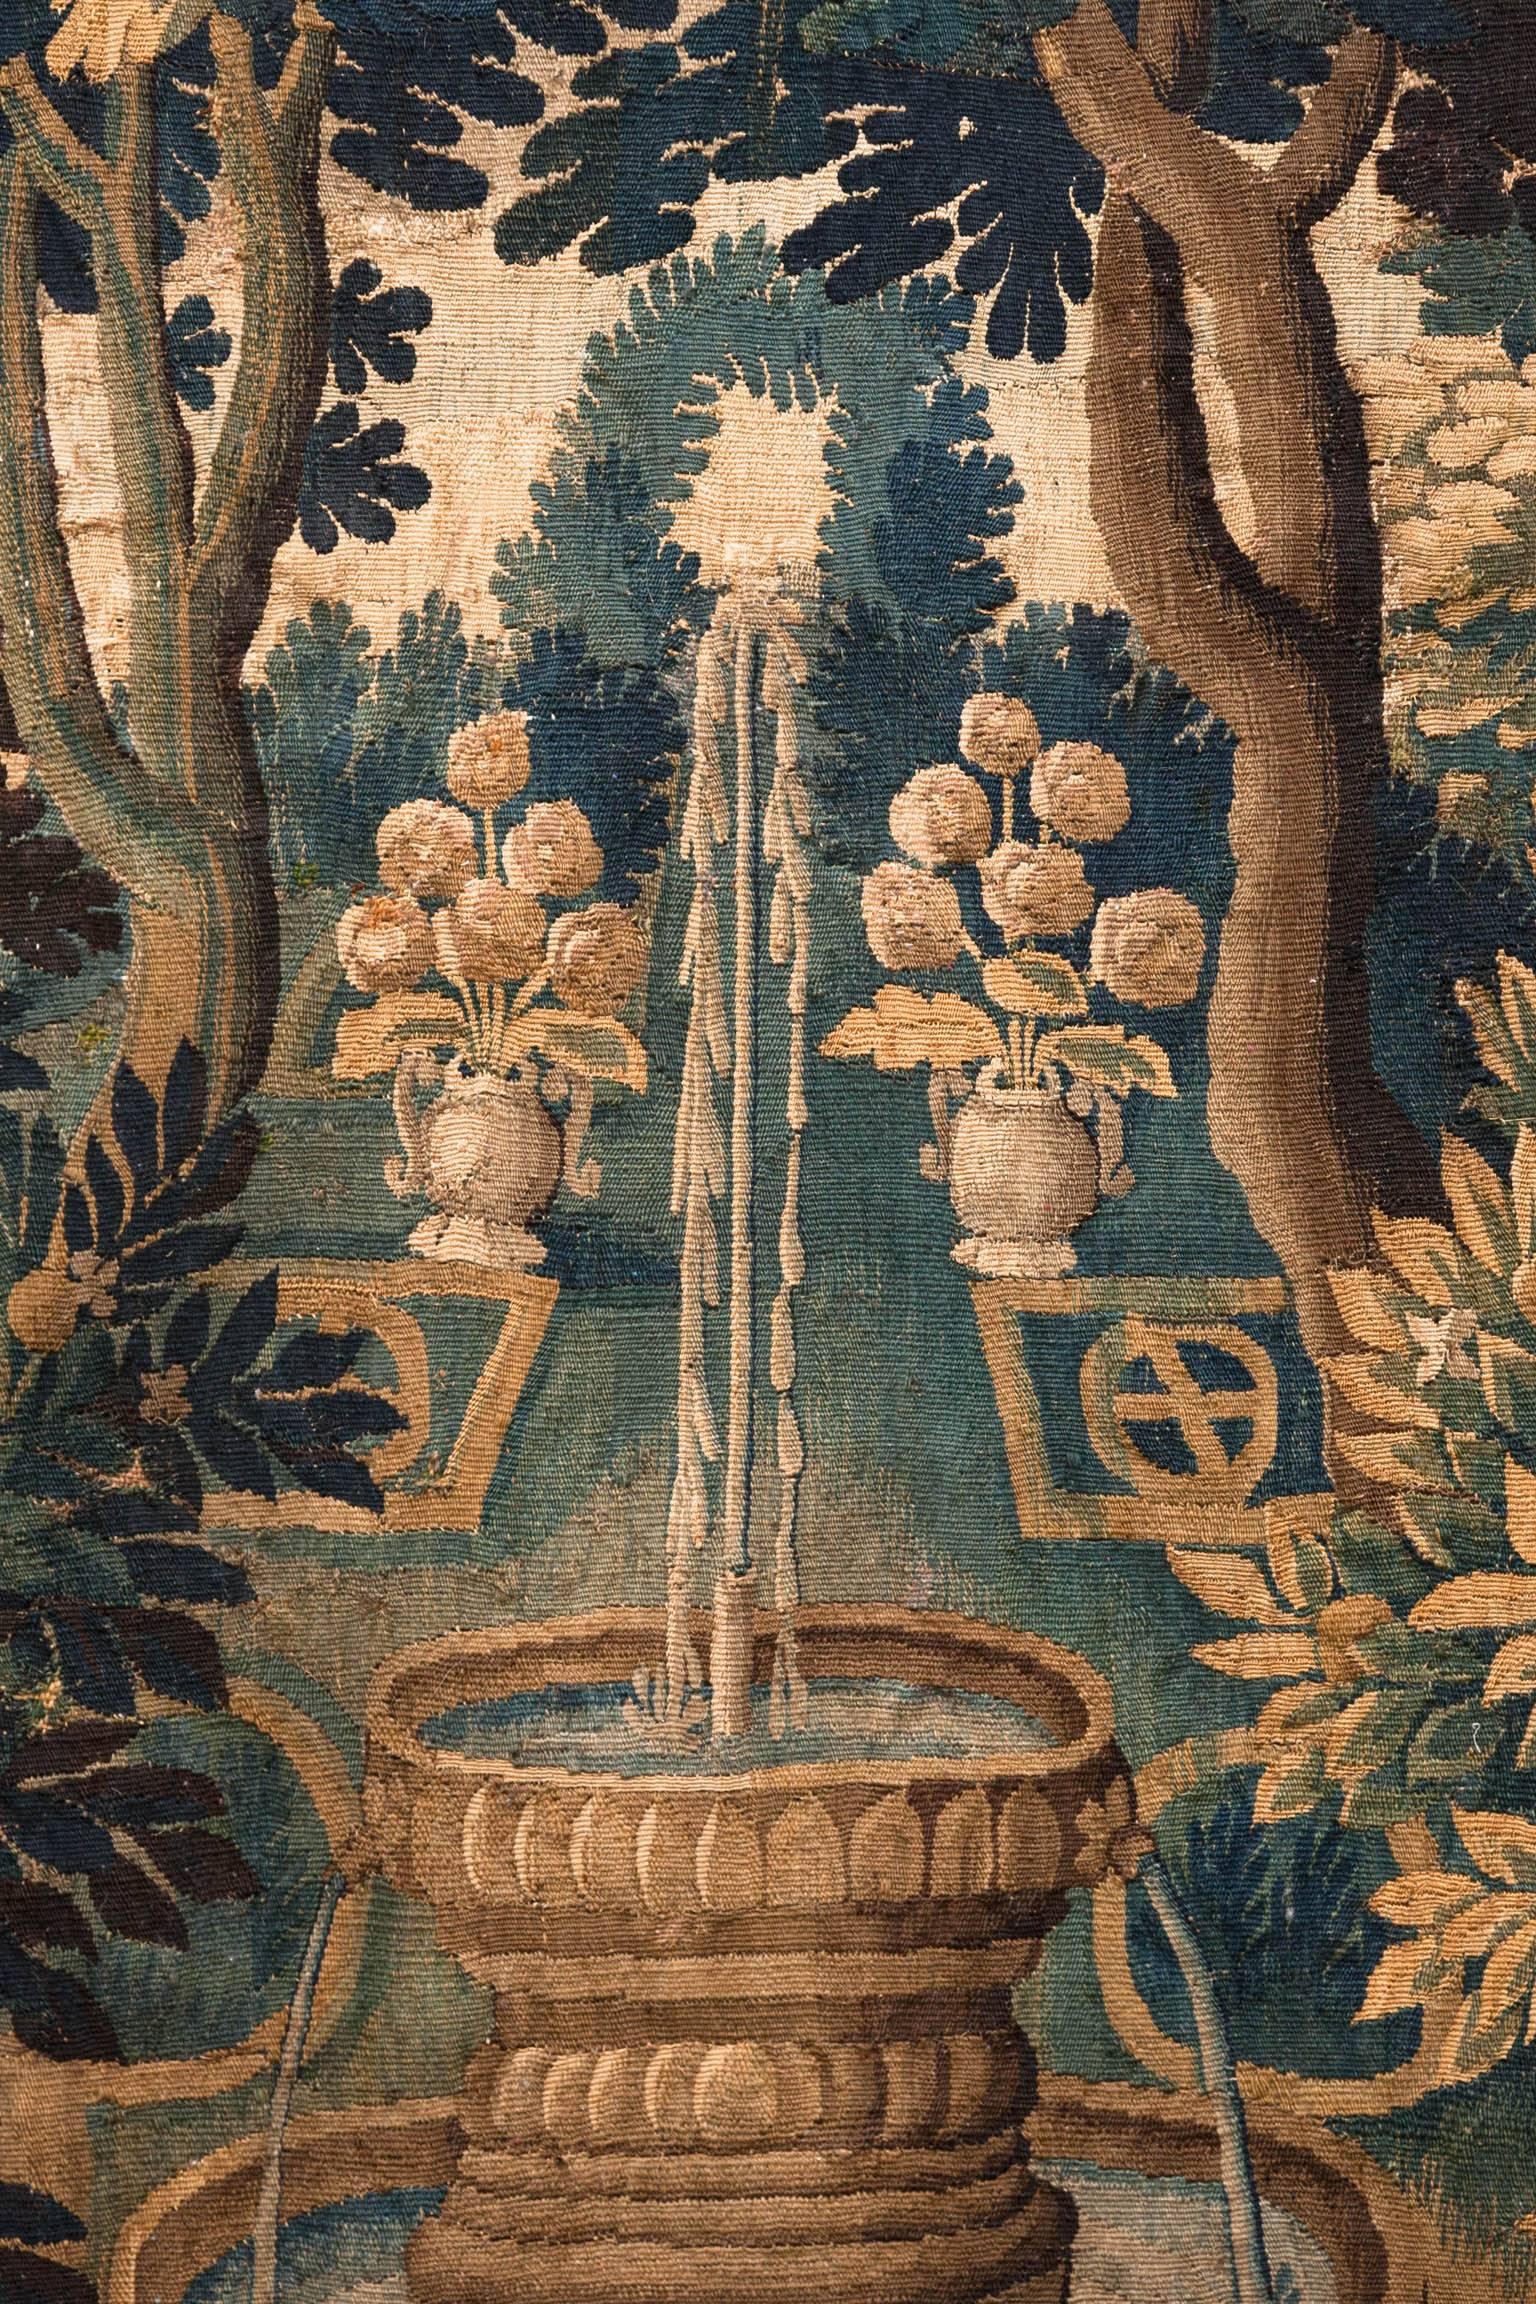 Verdure tapestry with two birds perched on plinths either side of two fruit trees which surround a fountain in an 18th century garden in the foreground.
In the background two urns hold flowers. With a third bird perched on top of the branch of a